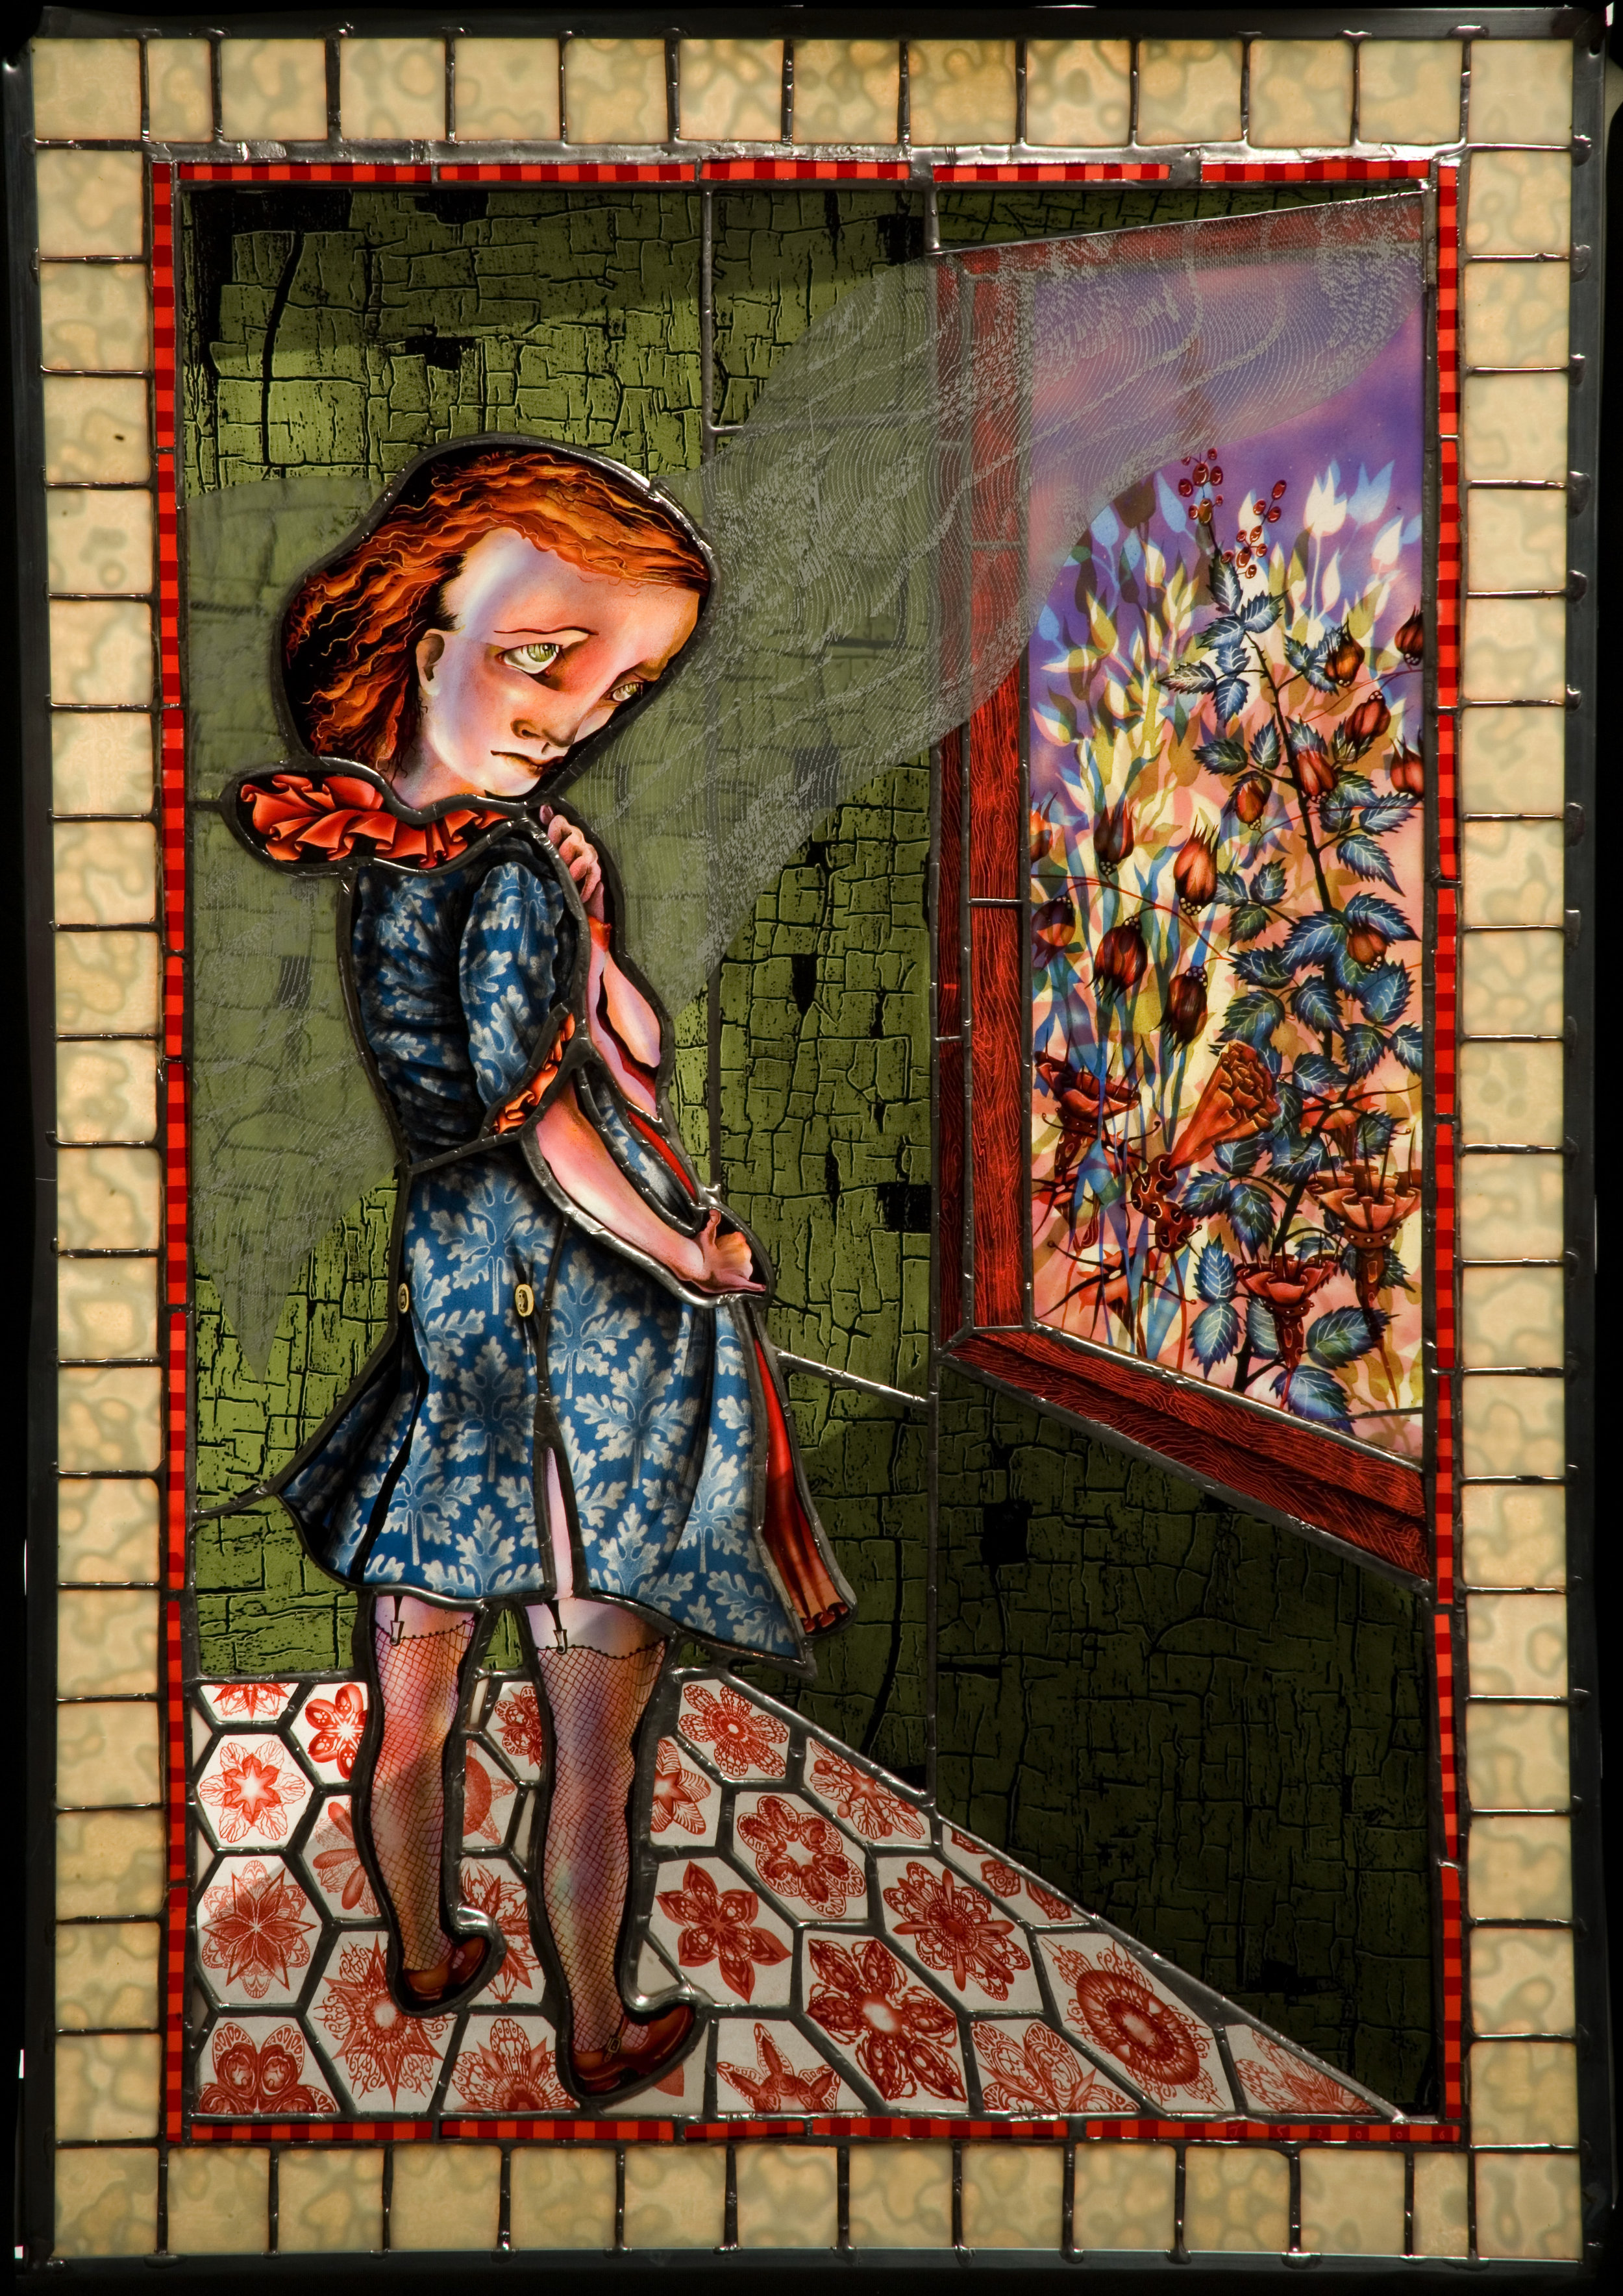  Judith Schaechter (American, born 1961).&nbsp; Flasher,  2006.&nbsp;Stained-glass lightbox;&nbsp;35 13/16 x 25 in. Collection of Museum of Glass, Tacoma, Washington, gift of Albert and Margarita Waxman. Photo by Dominic Episcopo, courtesy of the art